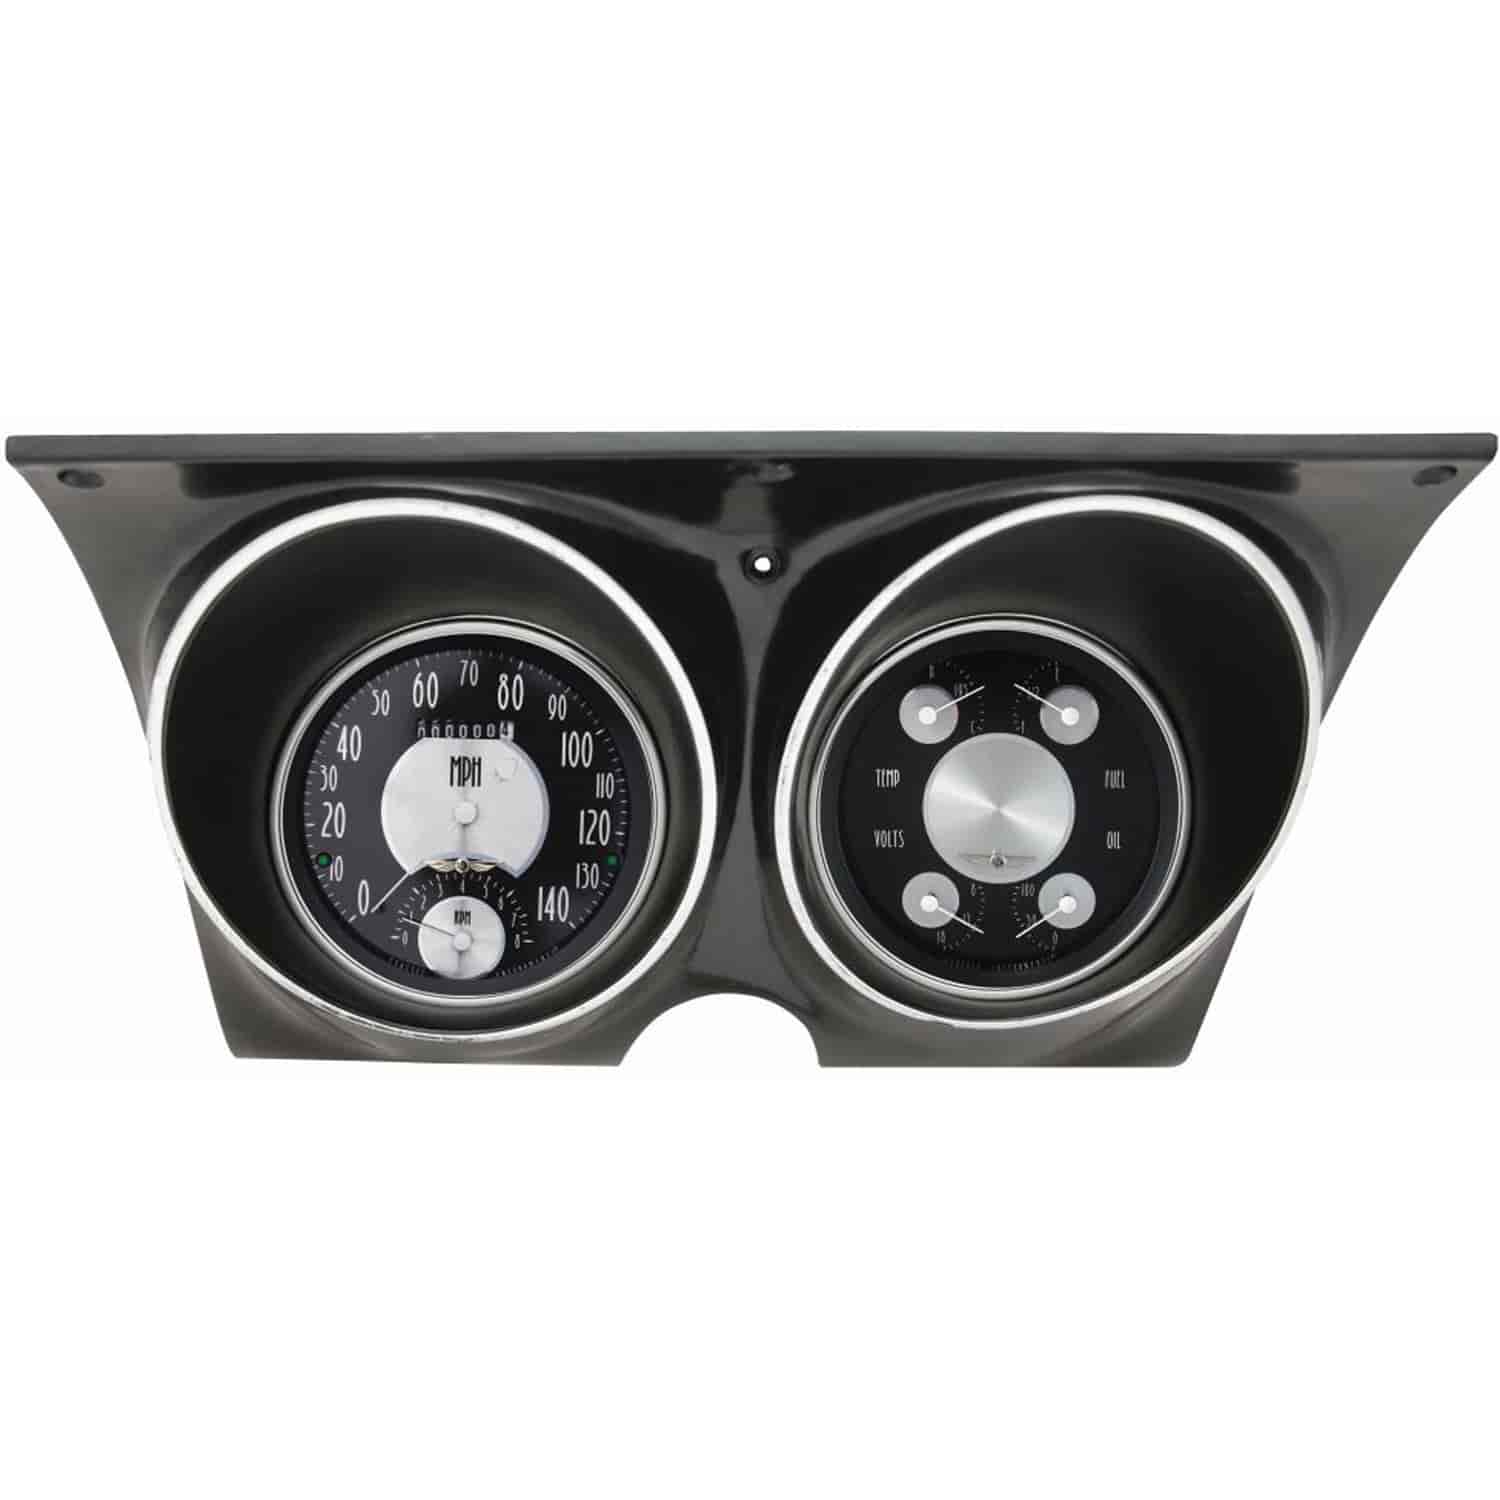 All-American Tradition Series Gauge Package 1967-68 Camaro Includes: